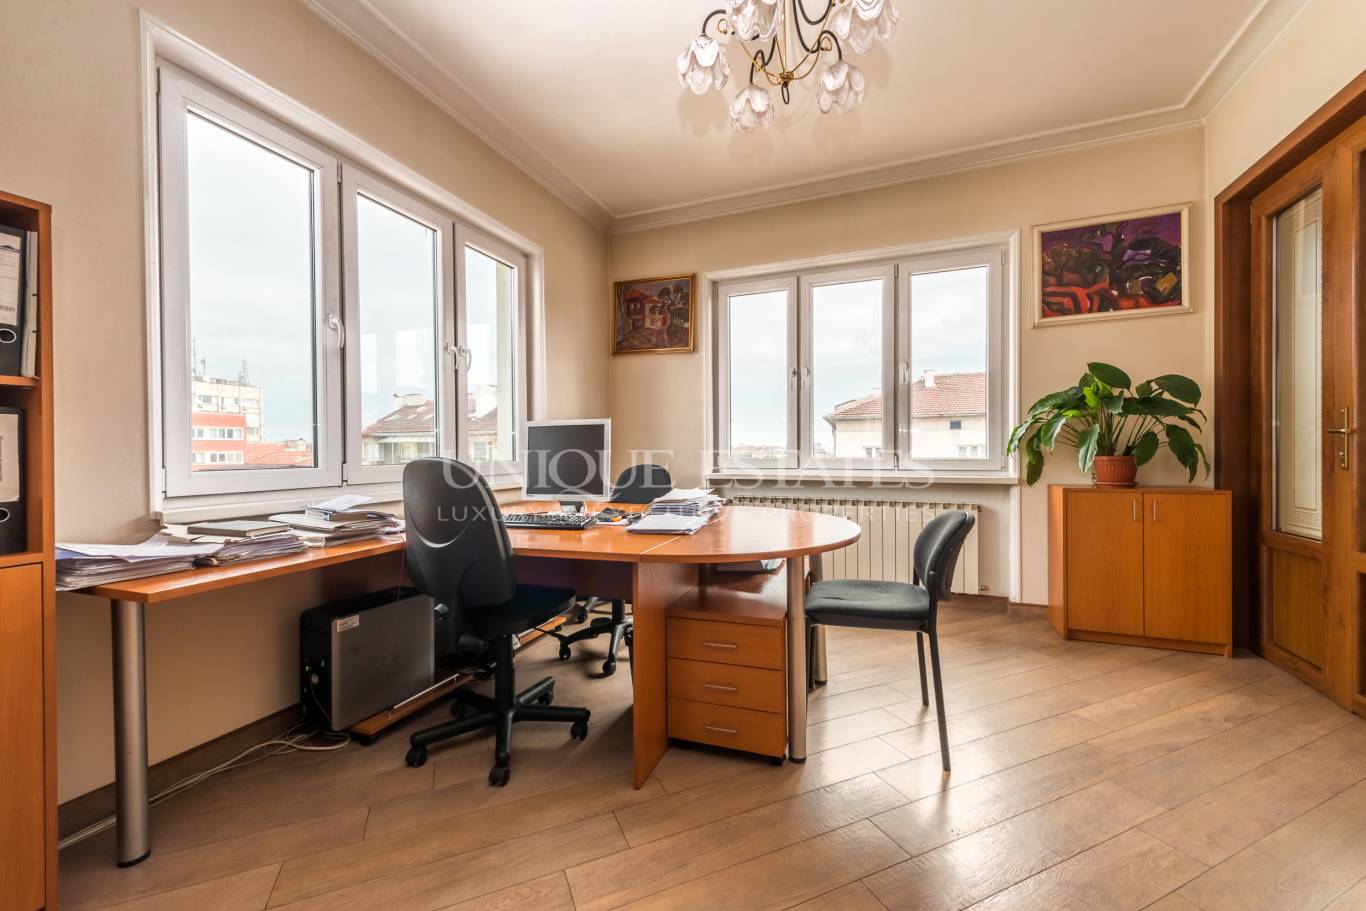 Office for rent in Sofia, Downtown with listing ID: K11904 - image 4